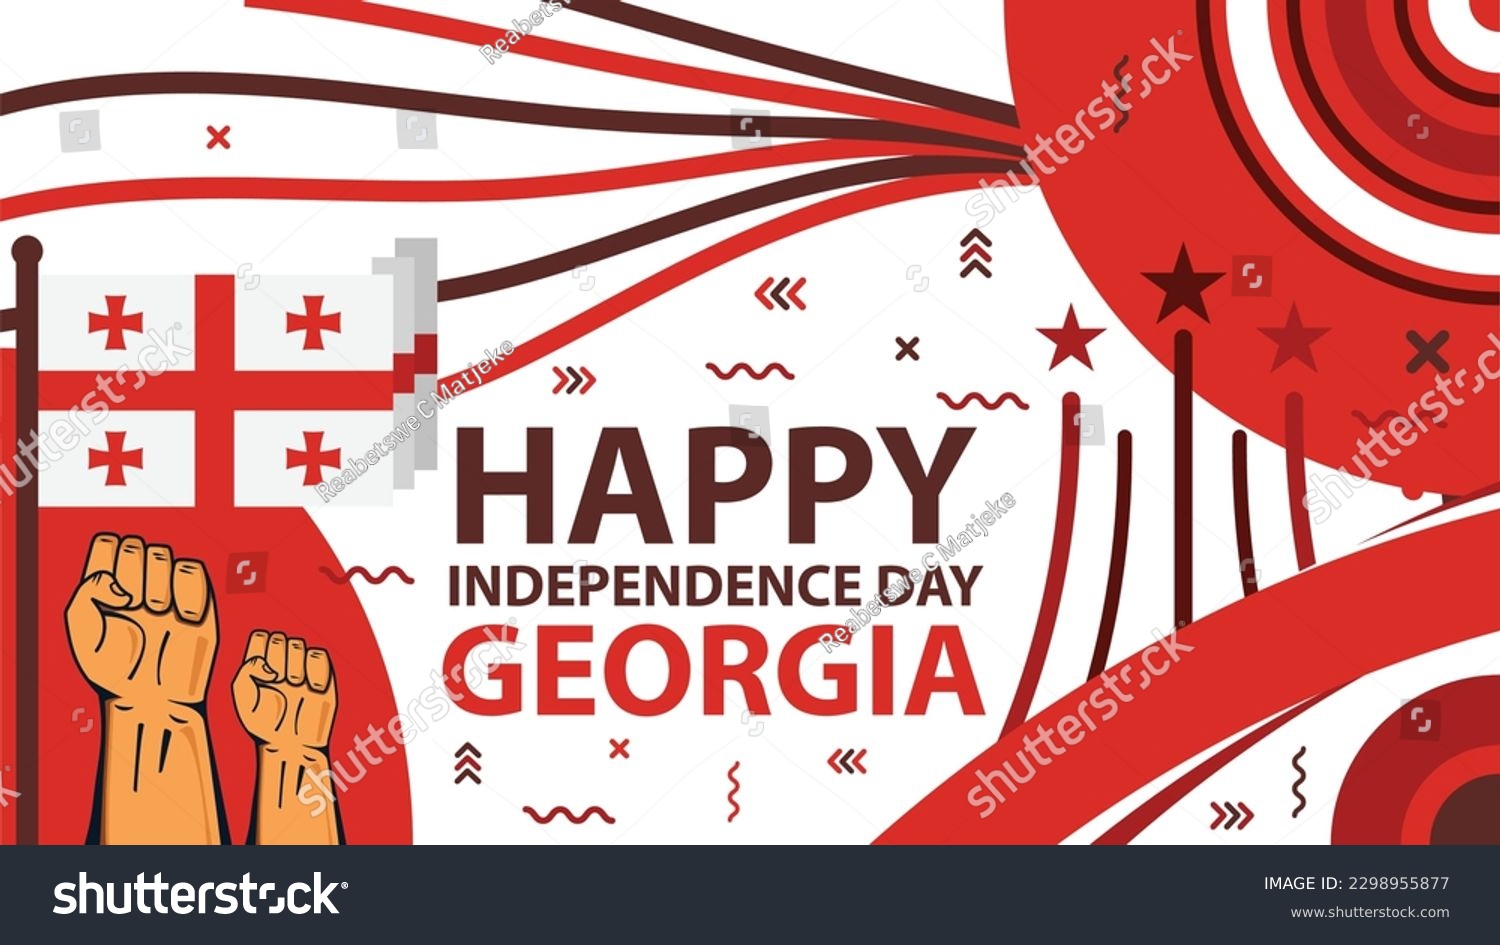 SVG of Happy Independence Day Georgia vector banner design with geometric retro shapes, Georgia flag, red color pallet and typography. Georgia Independence Day modern simple poster illustration. 26 May. svg